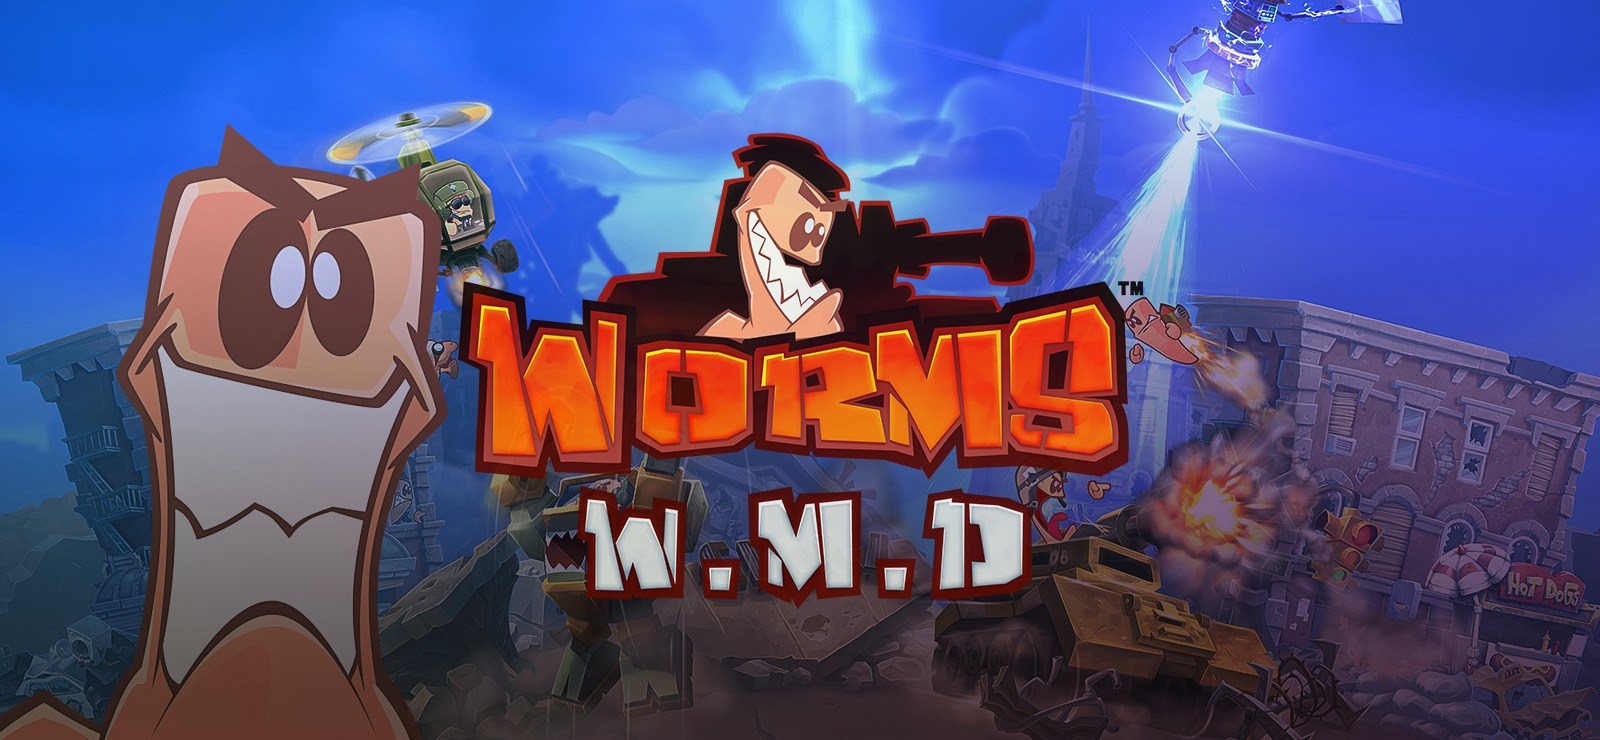 Worms wmd steam фото 58